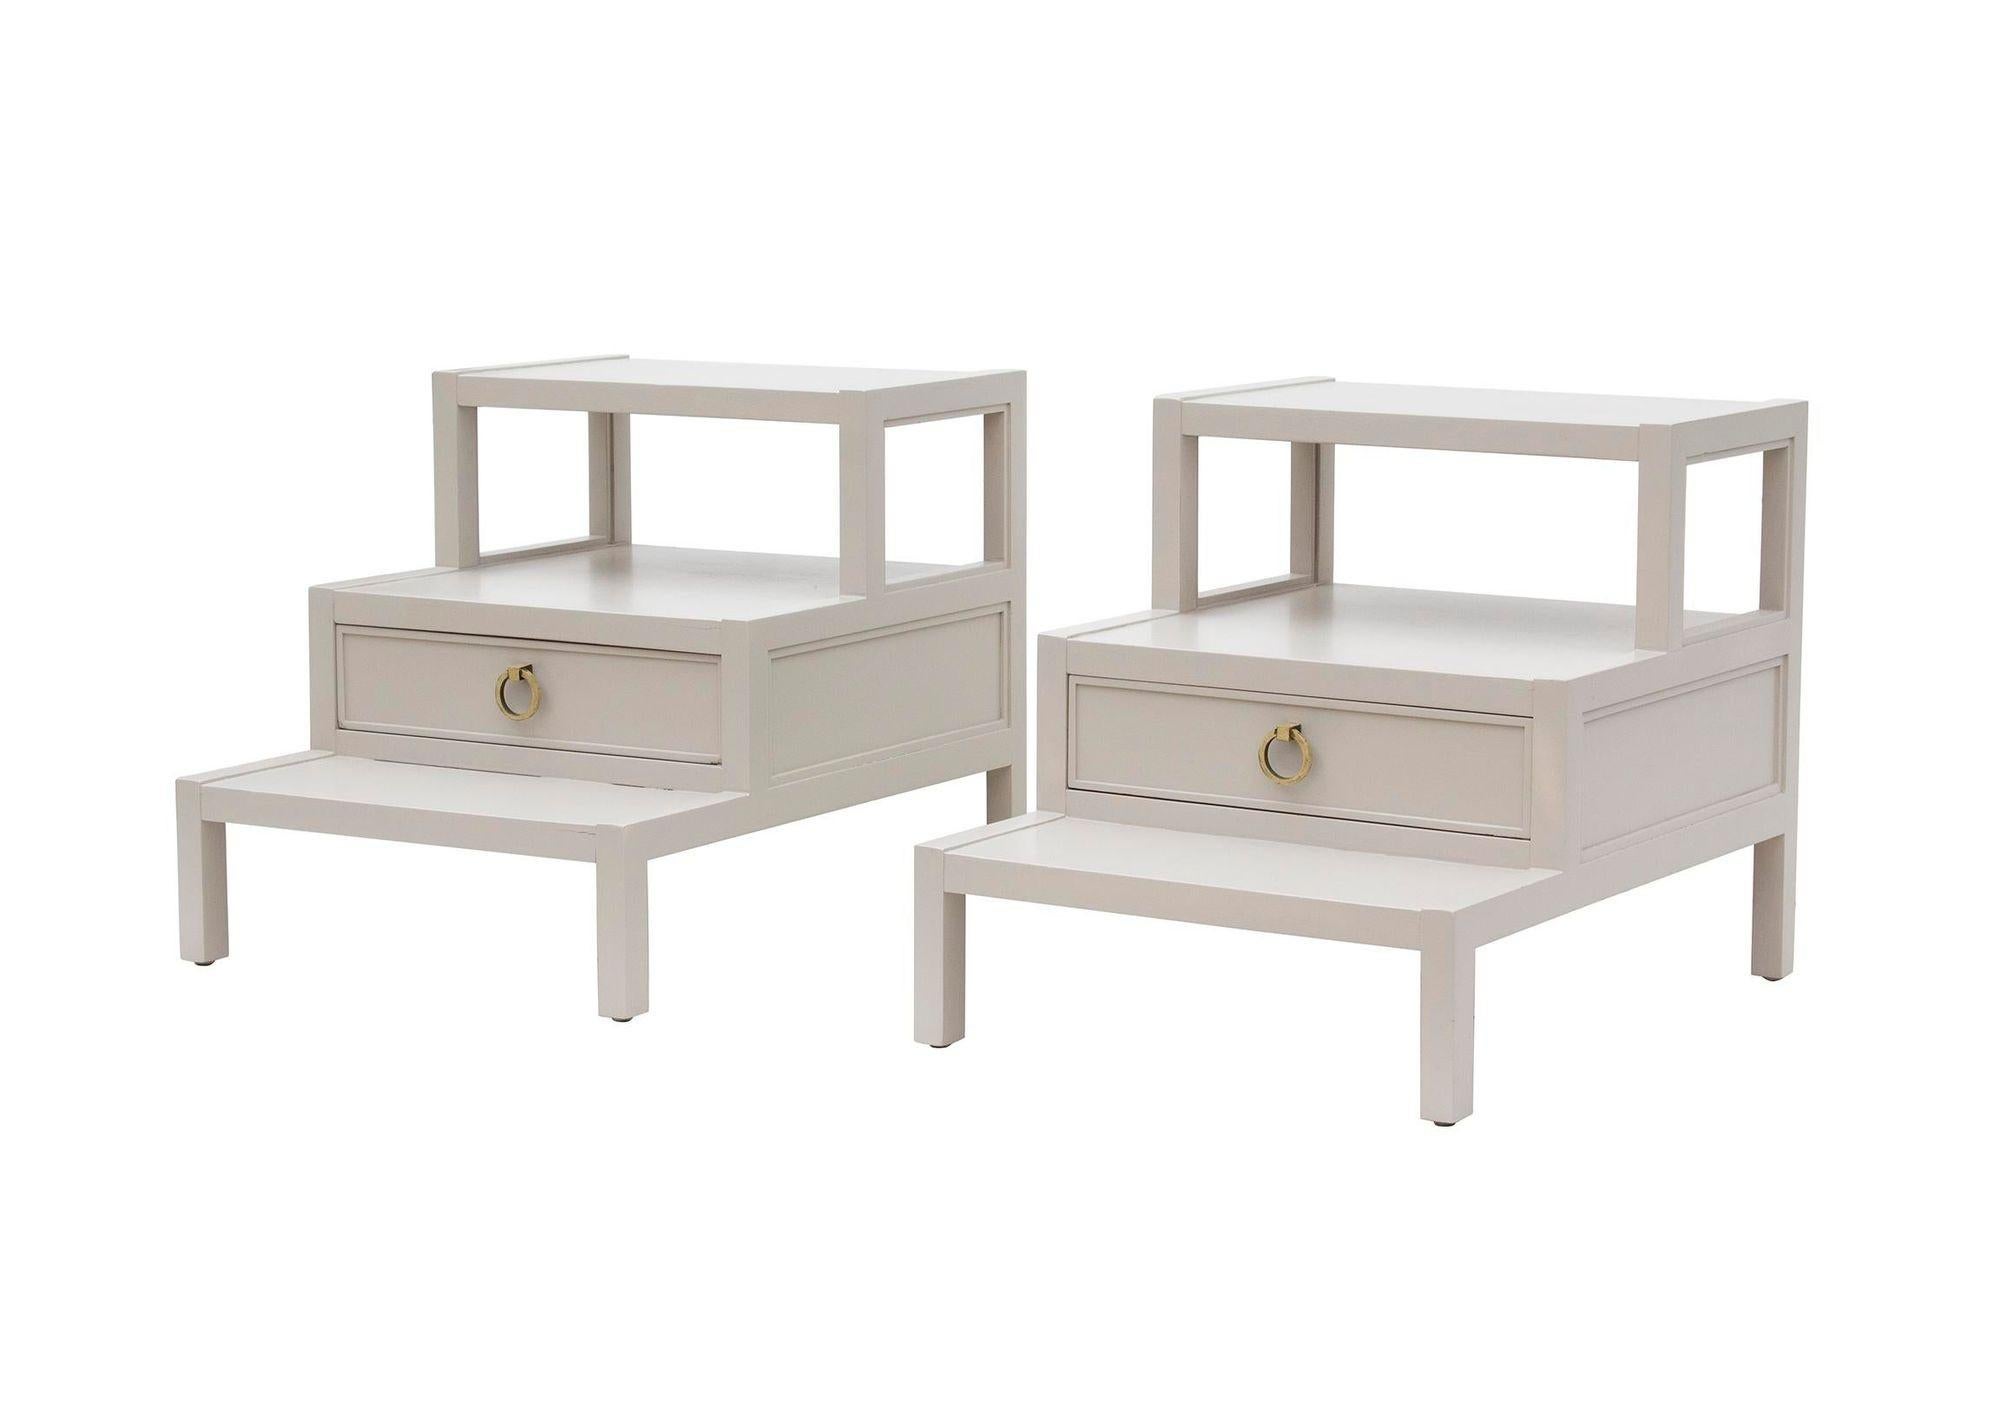 USA, 1950s
Pair of step end tables or nightstands designed by T.H. Robsjohn-Gibbings for Widdicomb, newly lacquered in Sherwin-Williams 6072 Versatile Gray. Each has '431' handwritten and 5159 stamped on the underside. Classic and practical